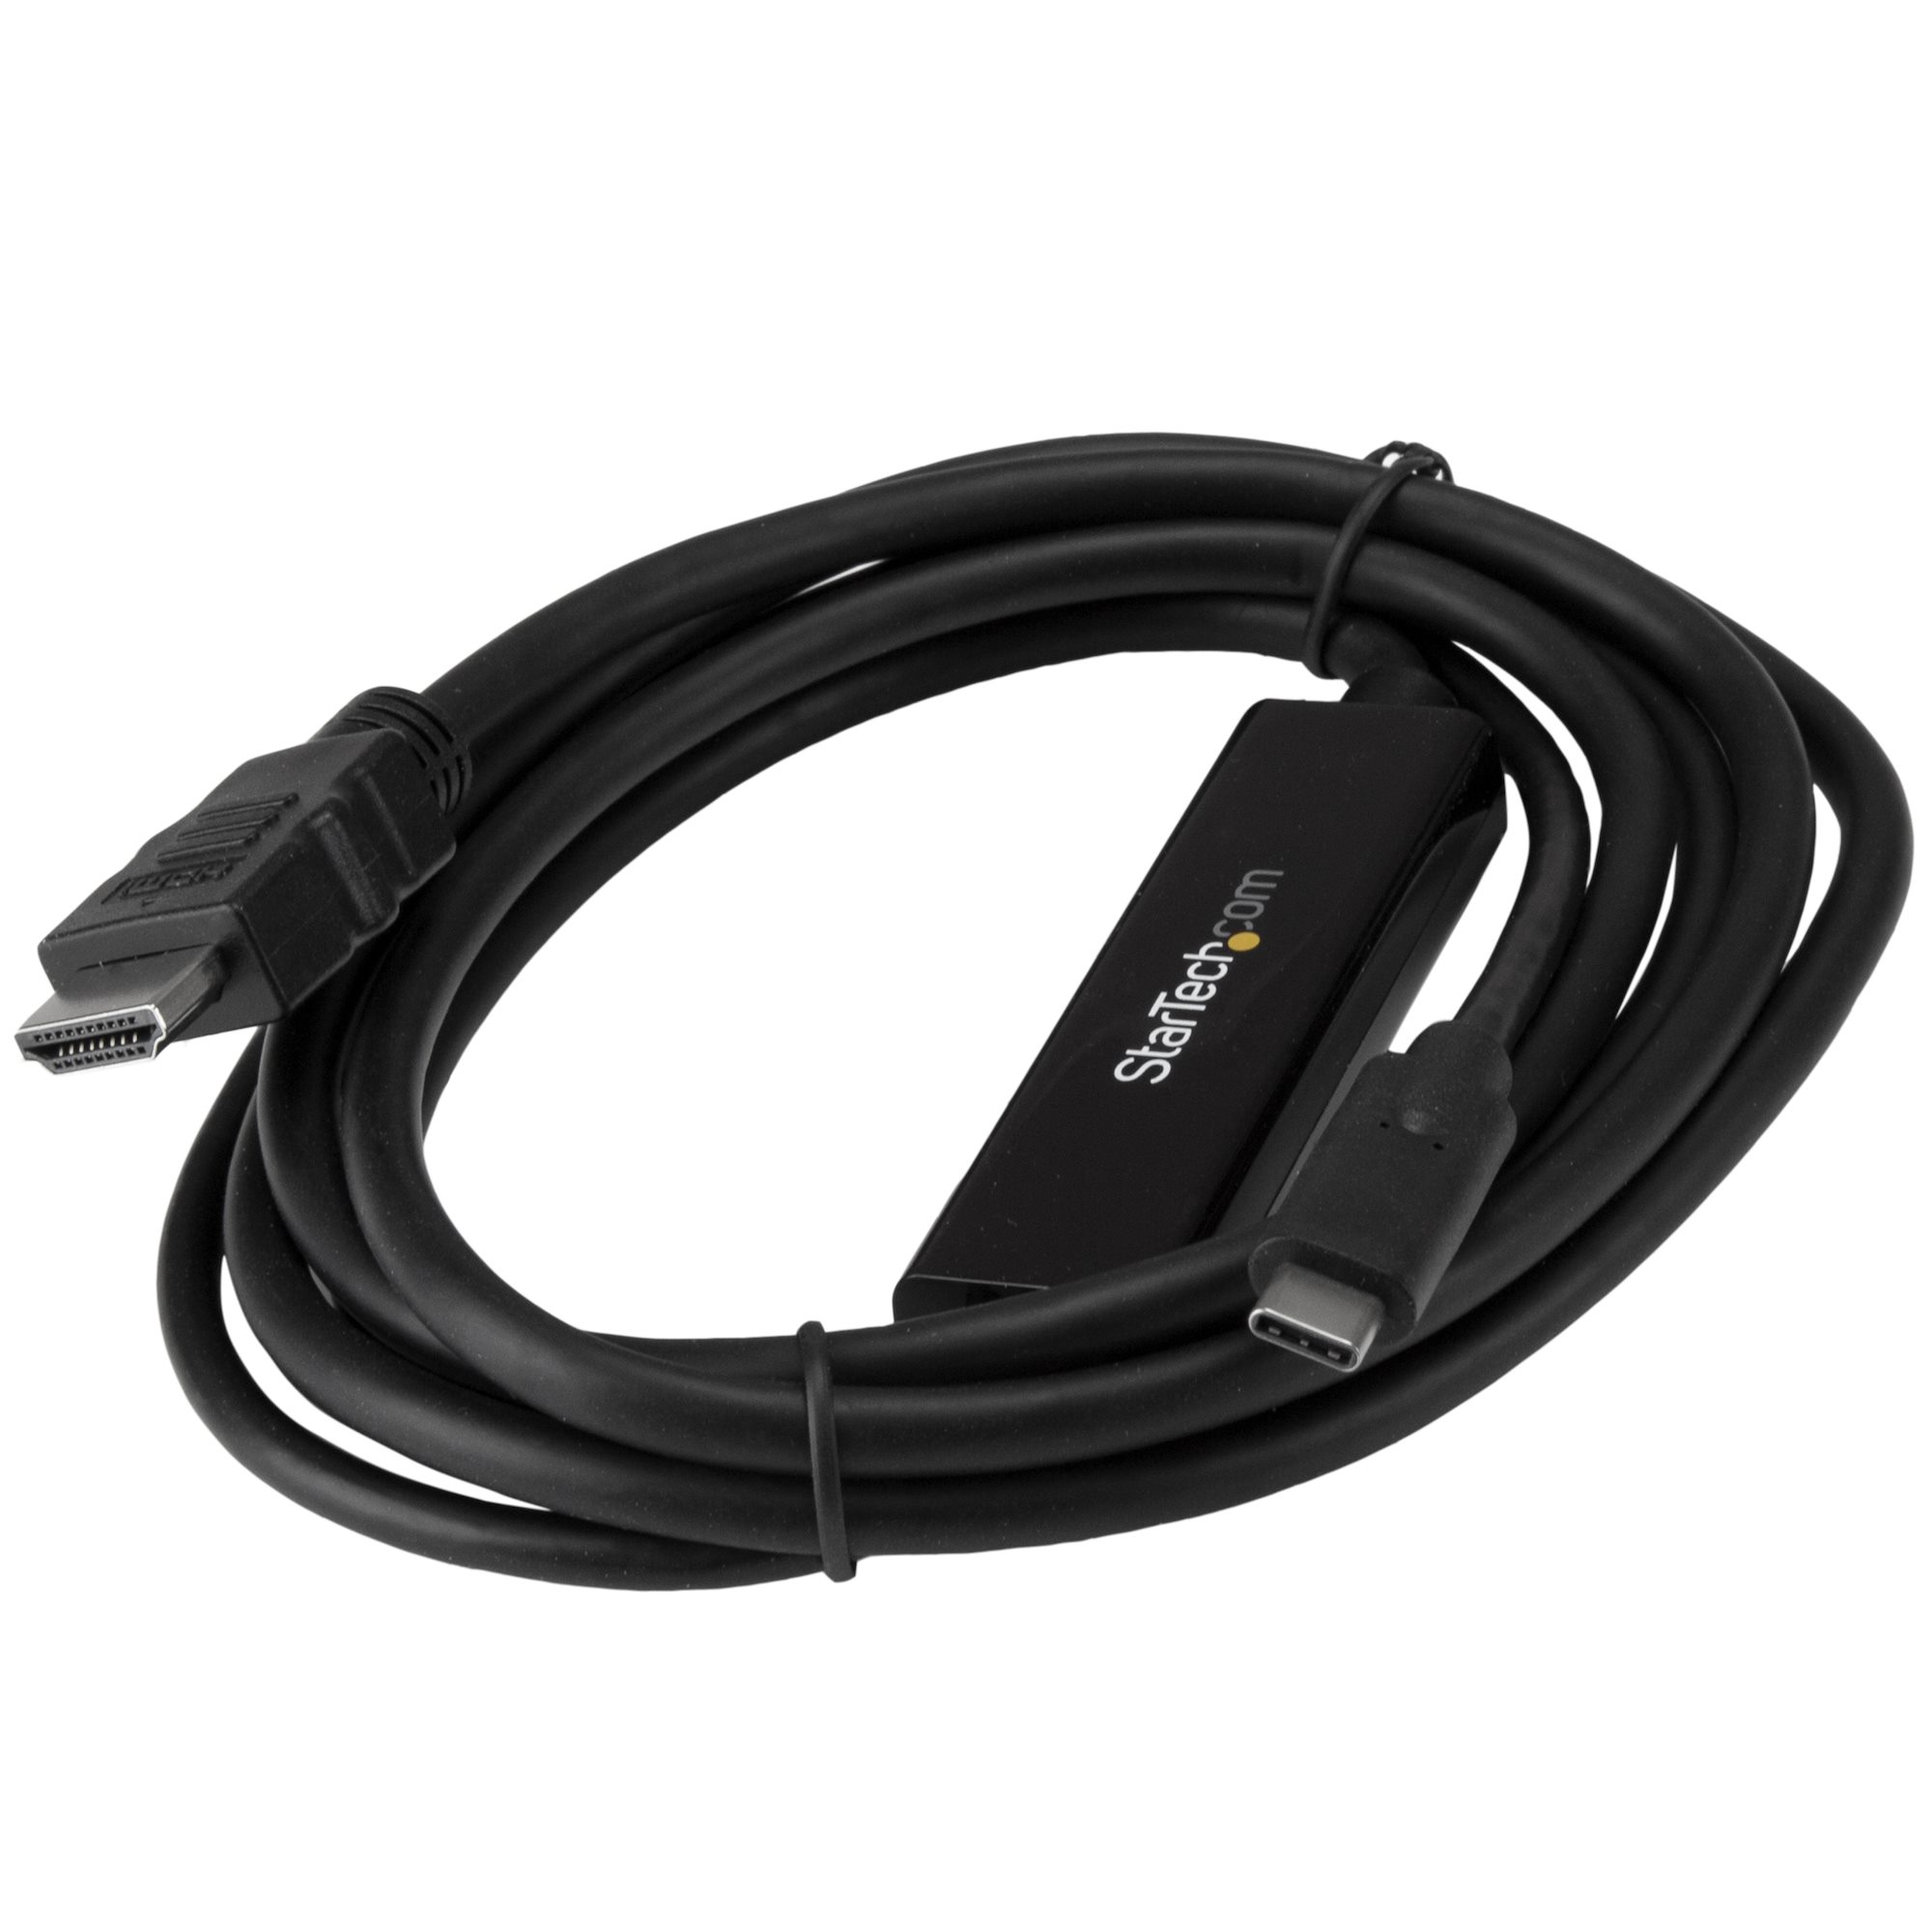 USB-C to HDMI Adapter Cable - 2m (6 ft.) - 4K at 30 Hz